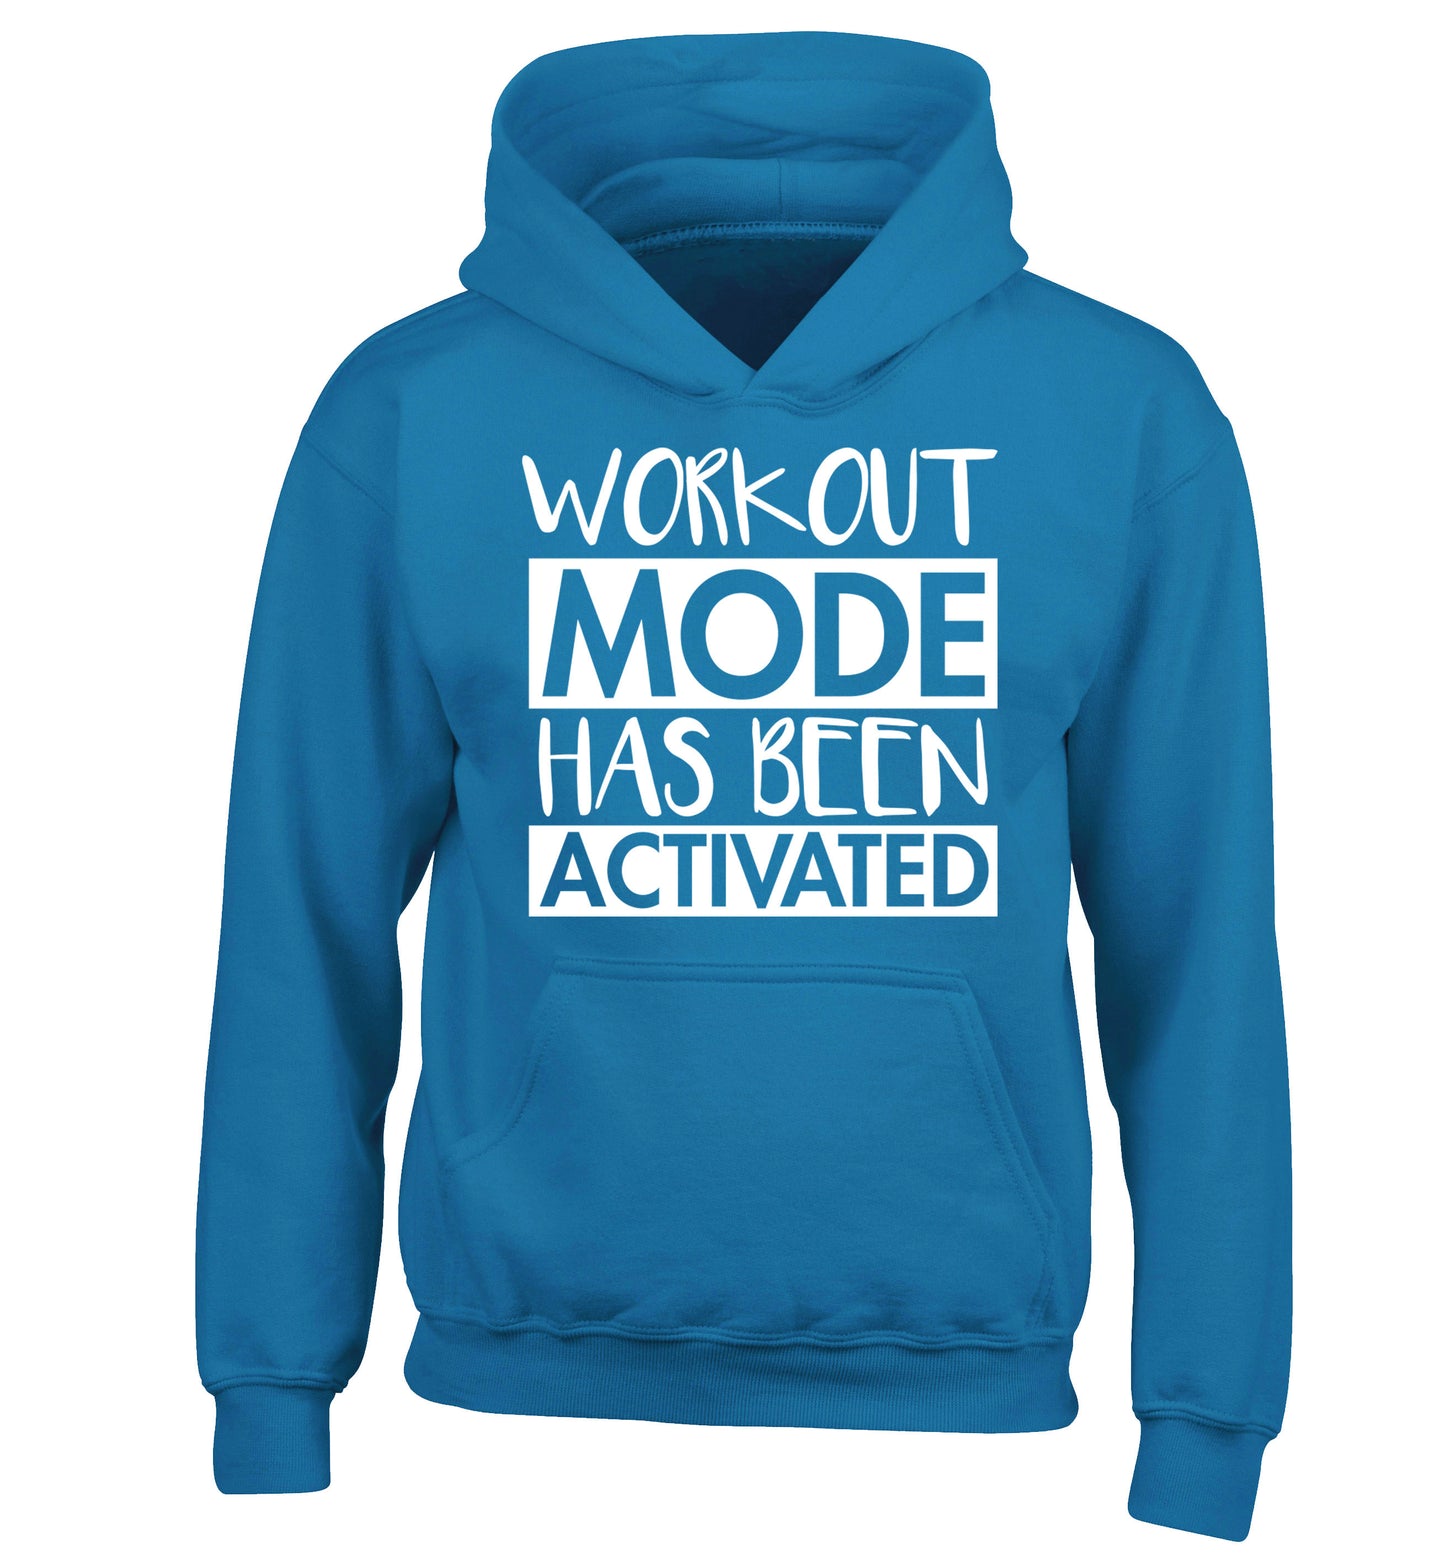 Workout mode has been activated children's blue hoodie 12-14 Years